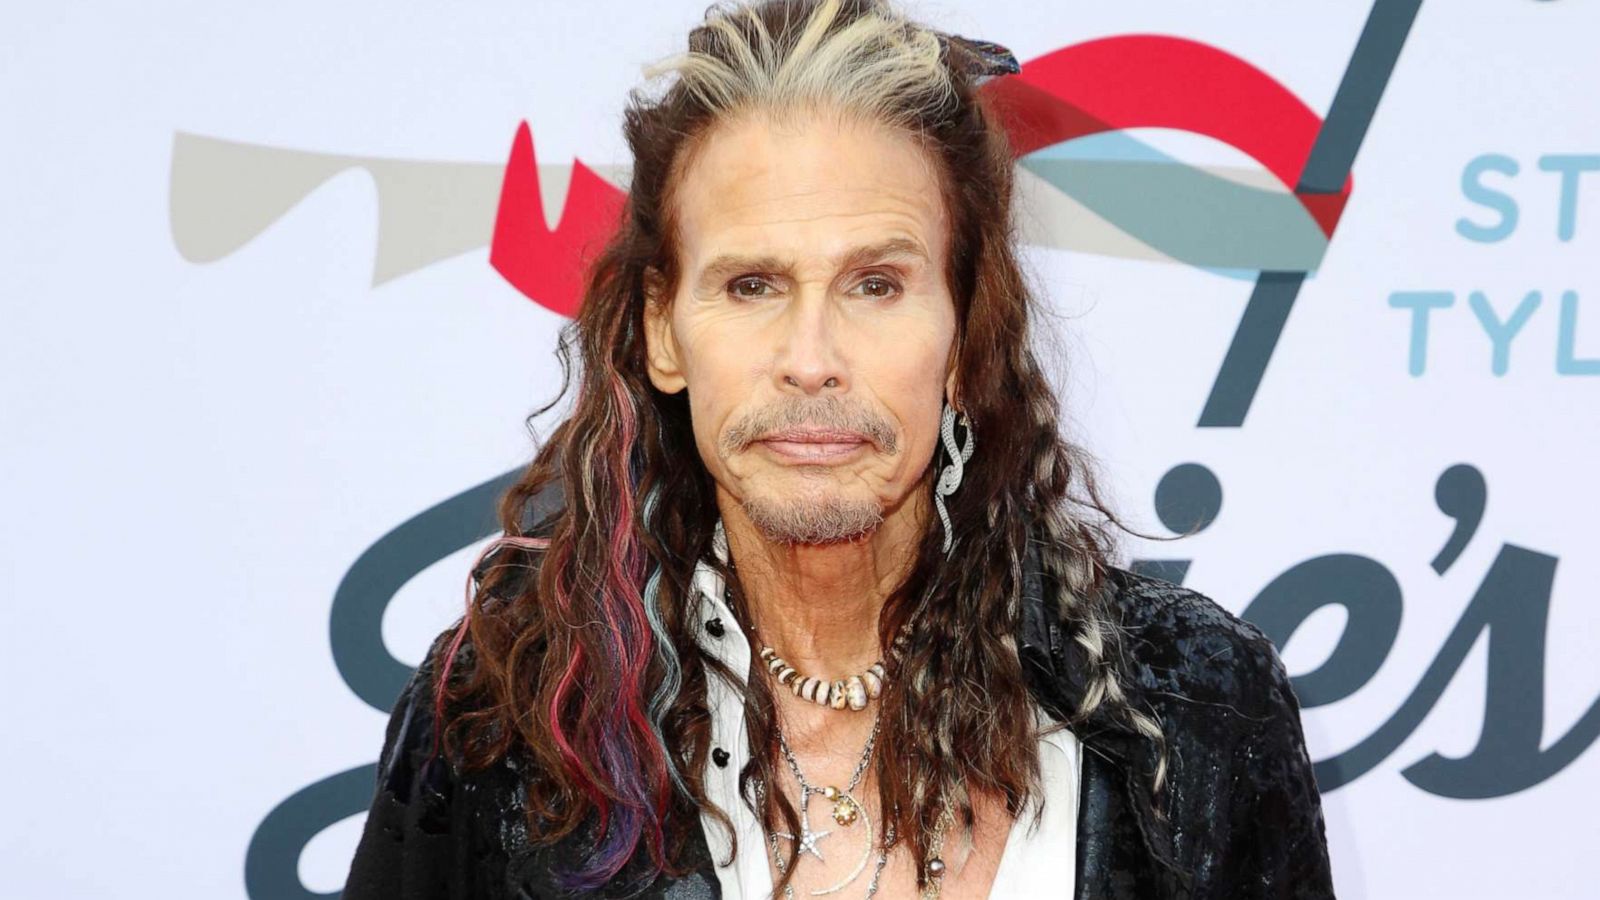 Steven Tyler's 4 Children: Everything to Know